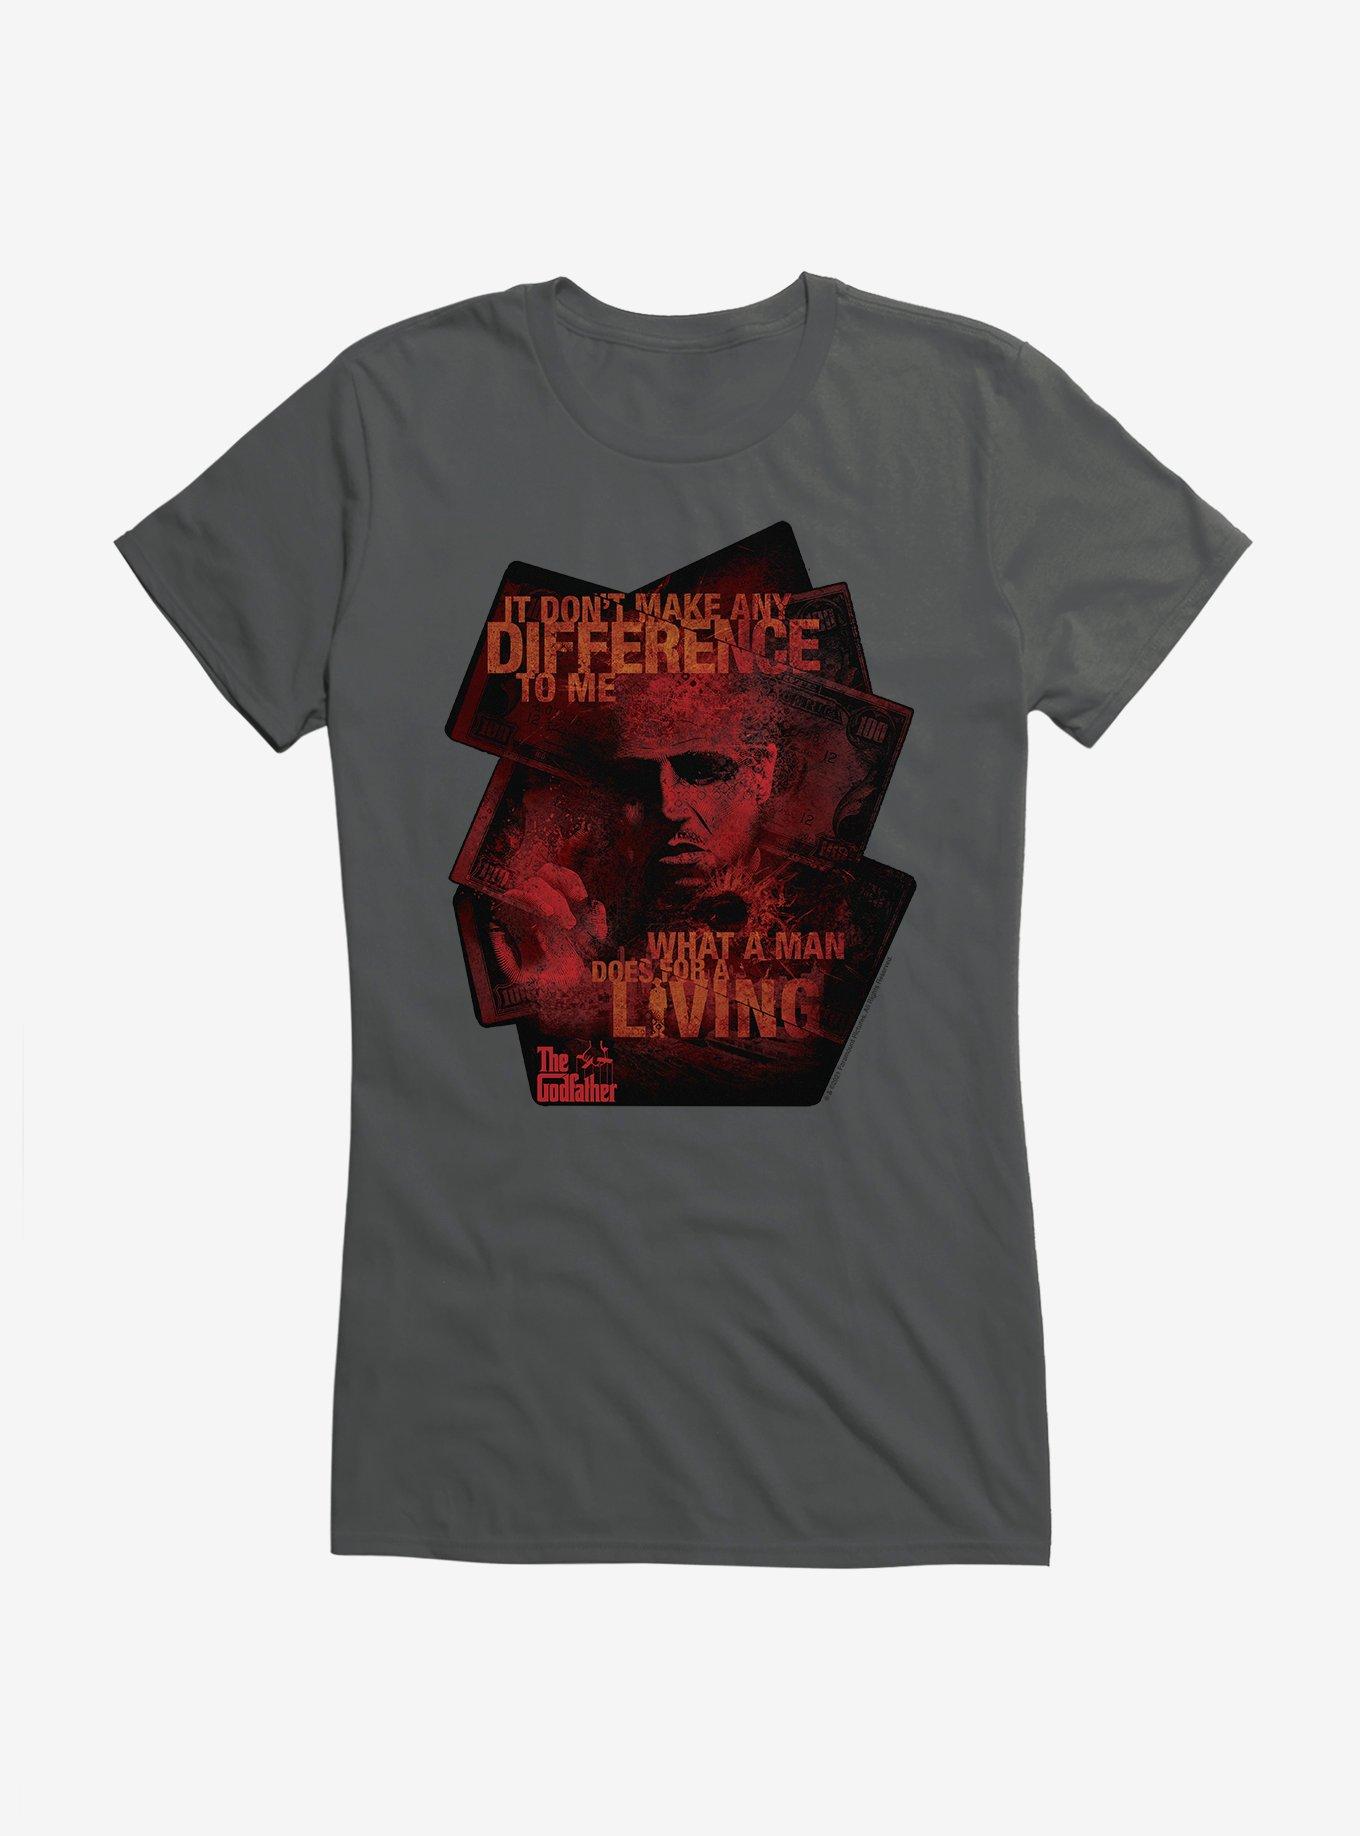 The Godfather It Don't Make Any Difference Girls T-Shirt, , hi-res